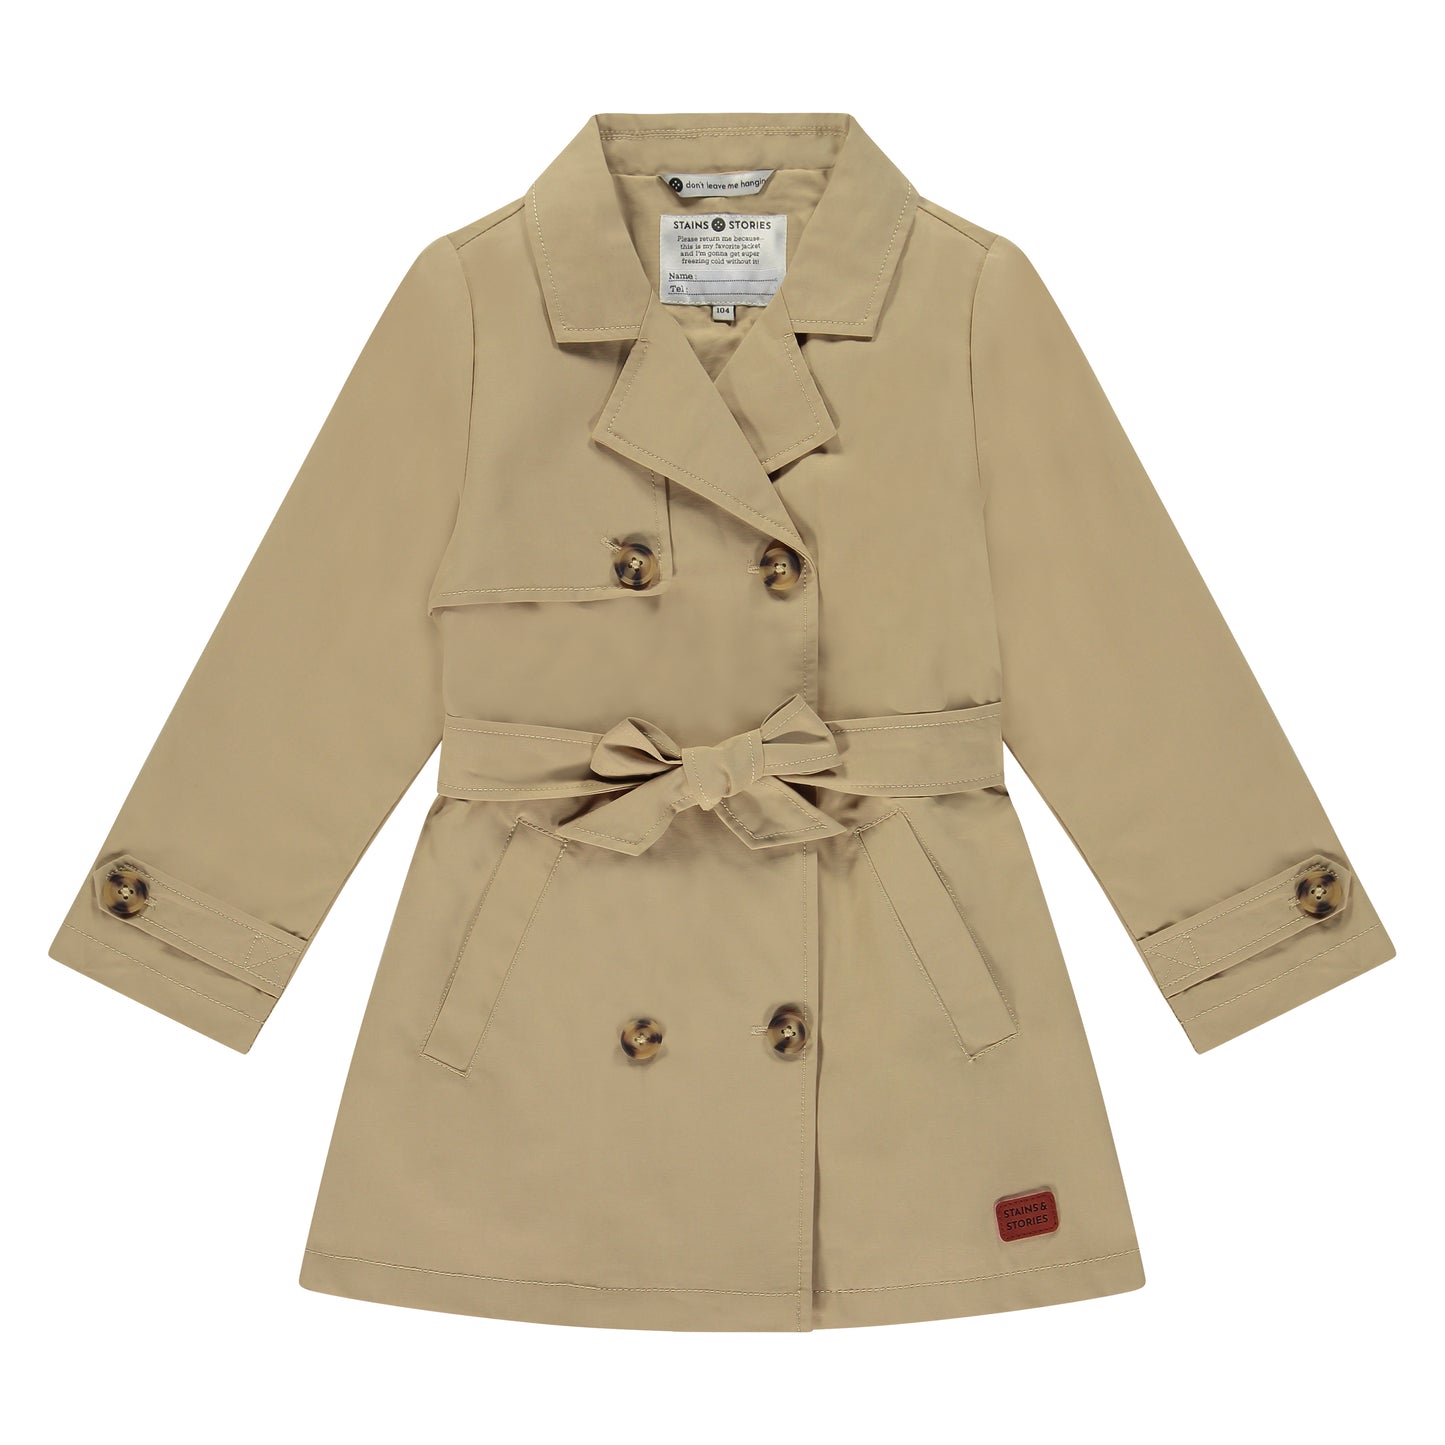 Stains & Stories Trenchcoat - Beige